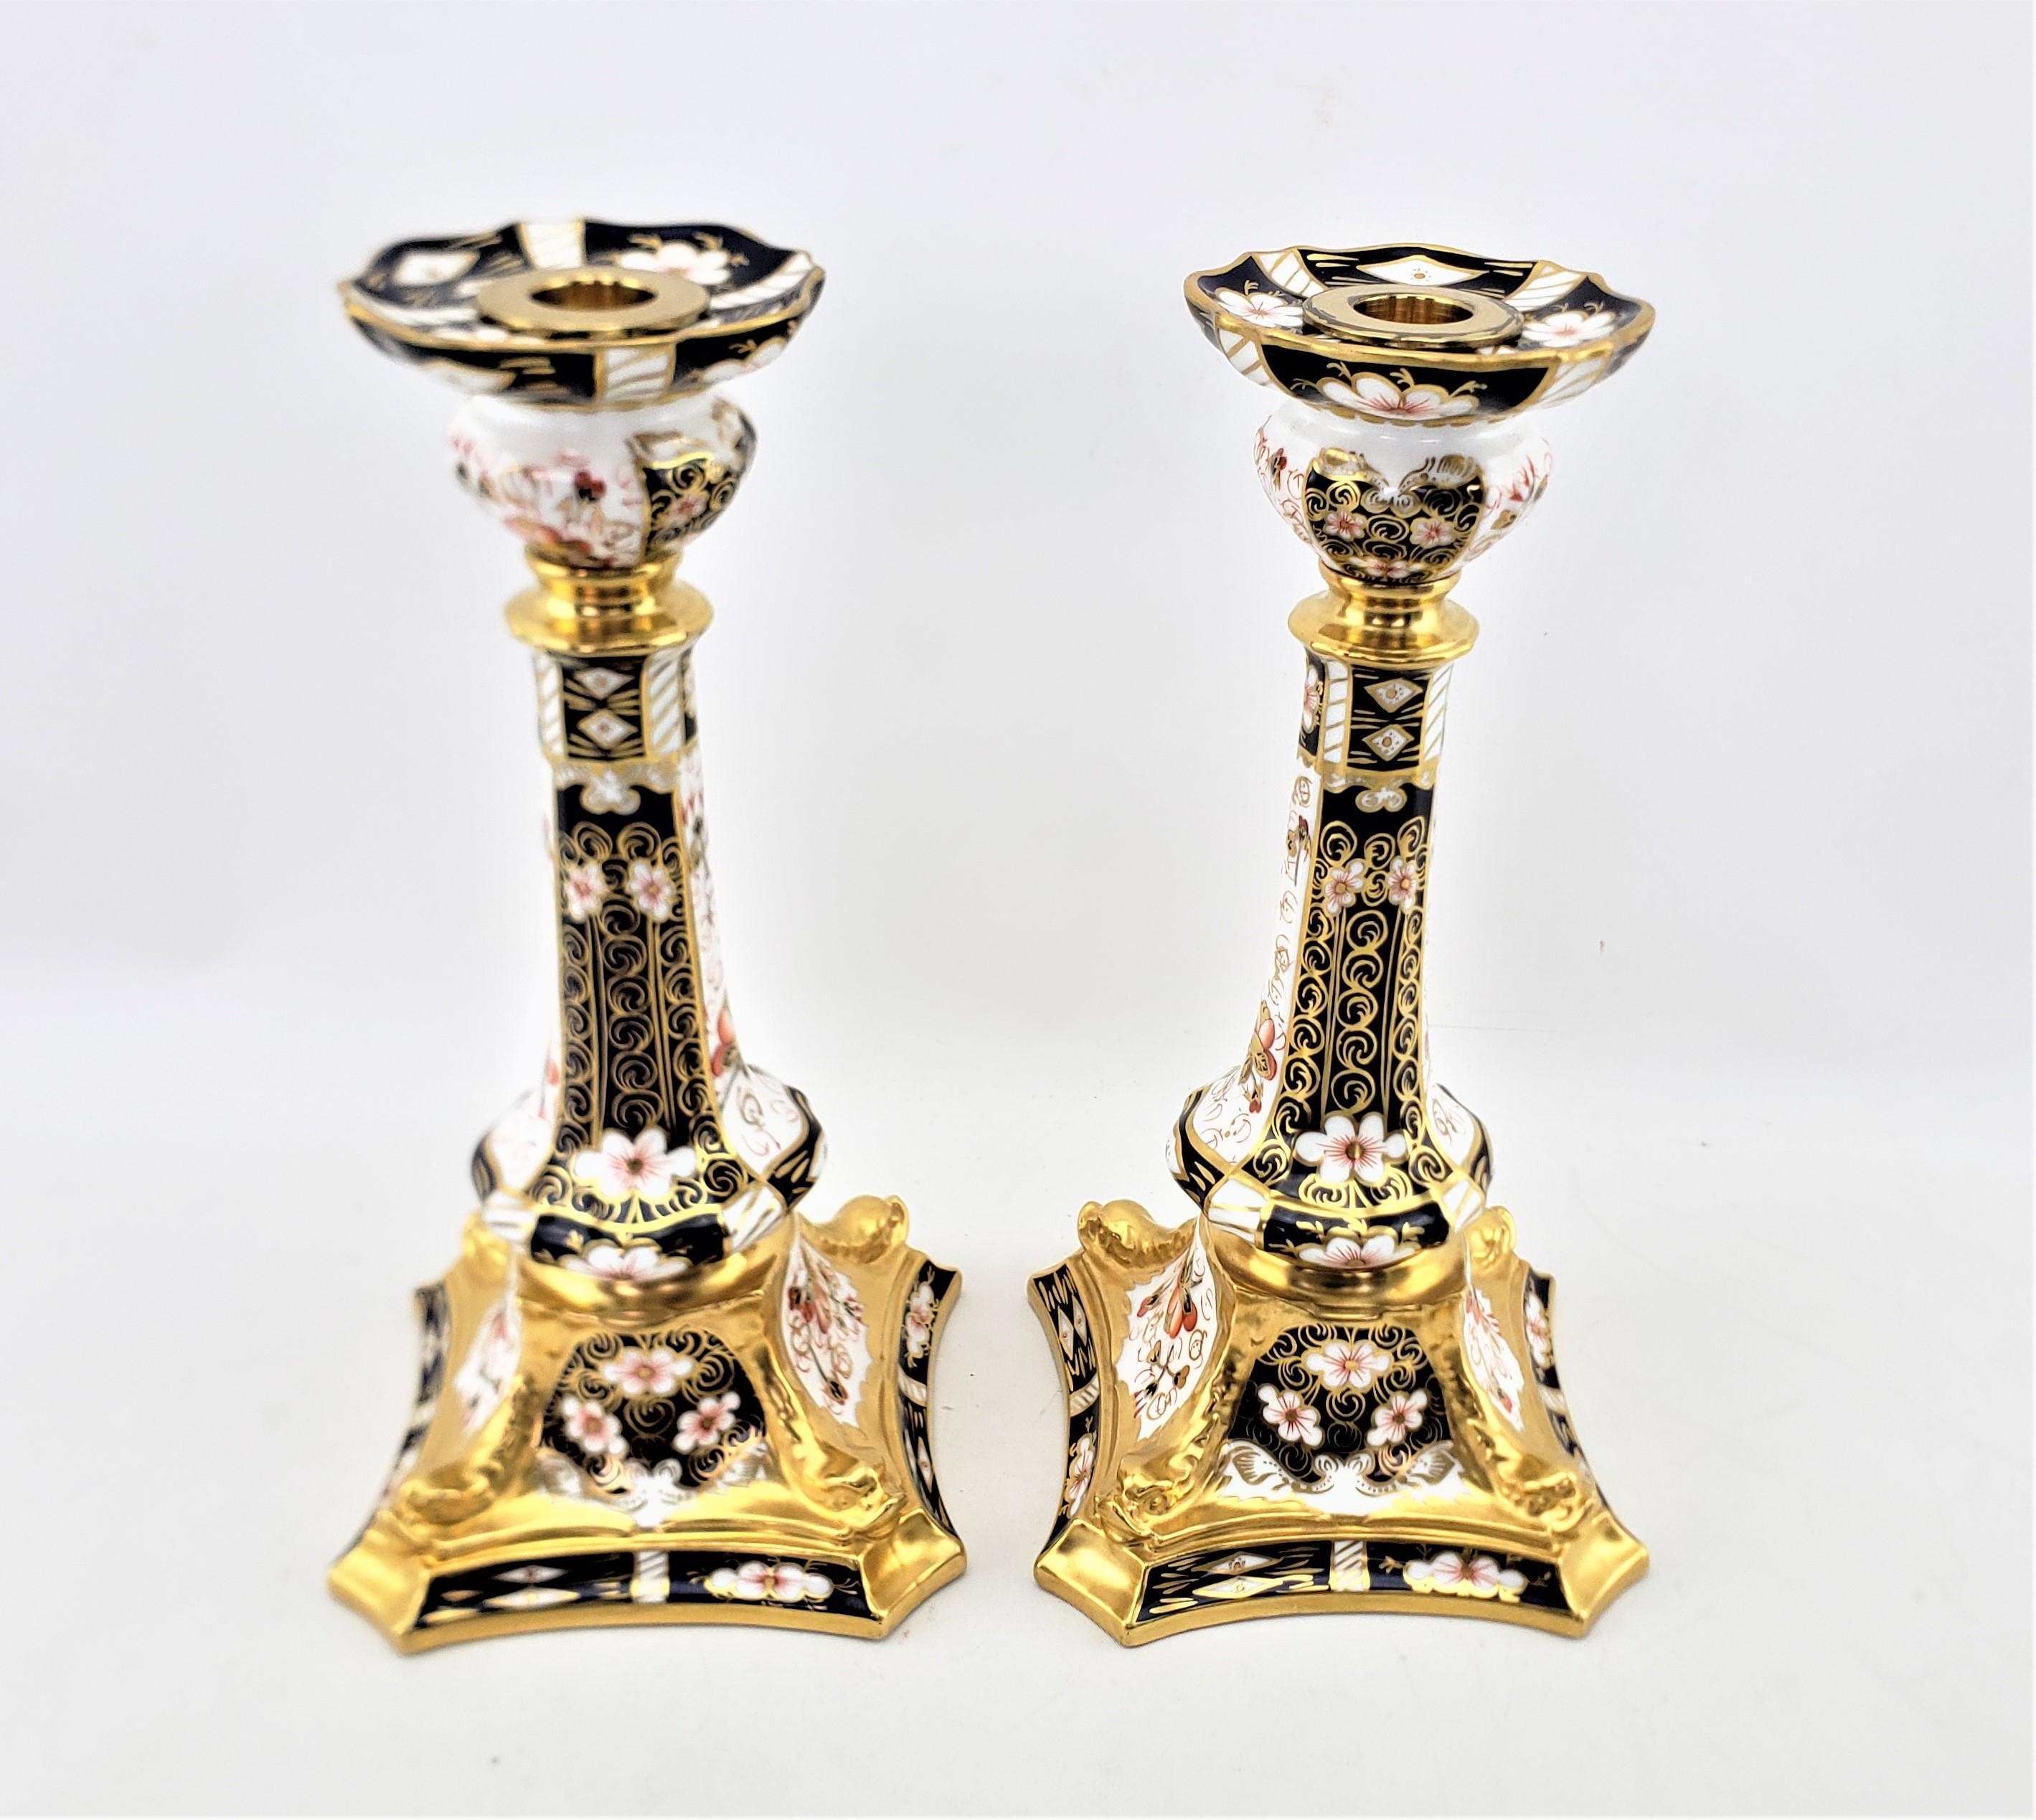 This pair of large candlesticks was made by the highly renowned Royal Crown Derby factory of England in approximately 1920 in their traditional 2451 Imari pattern. The candlesticks are done in fine bone china with a white ground, and hand-painted in